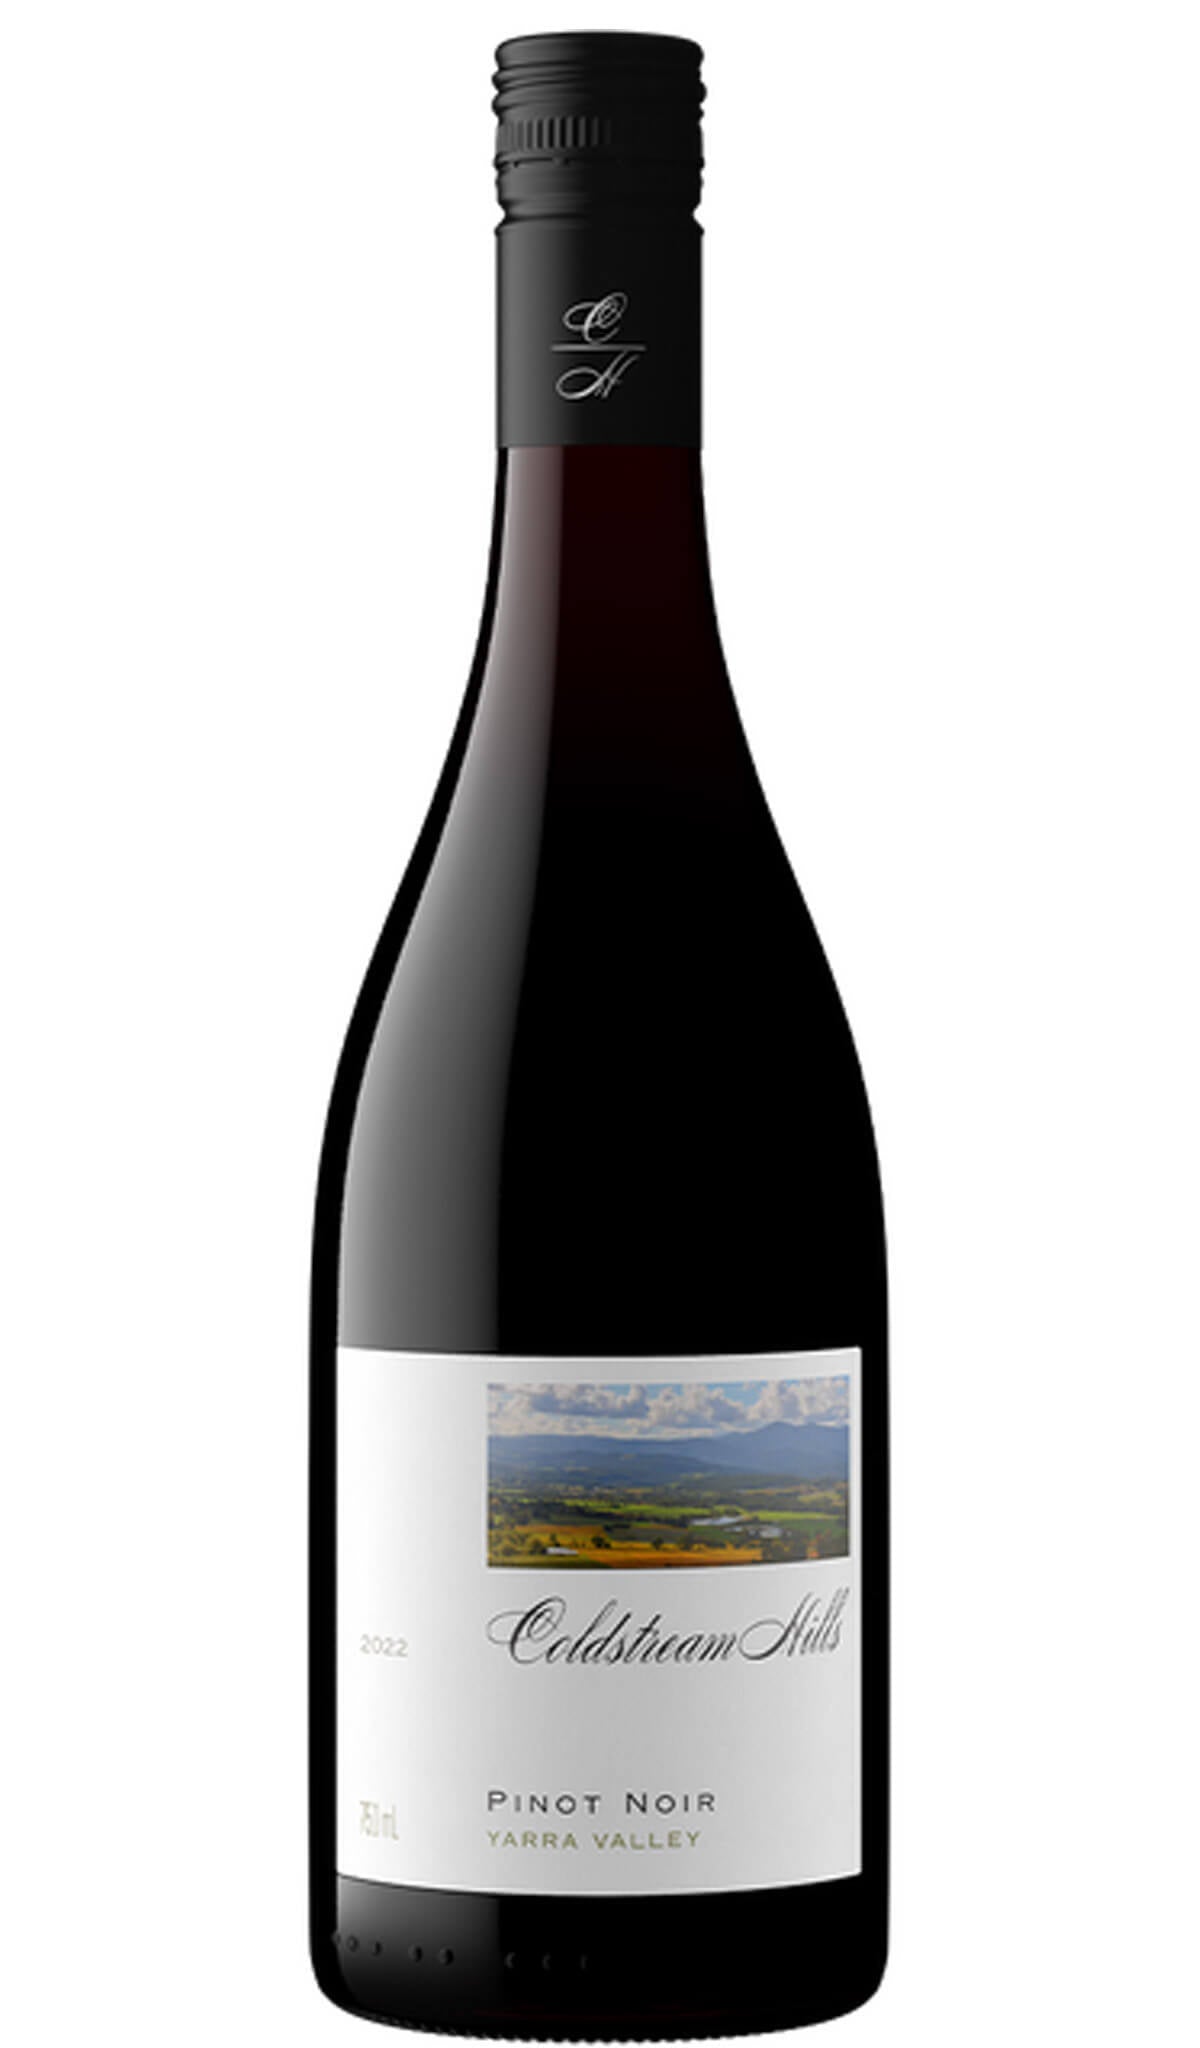 Find out more or buy Coldstream Hills Yarra Valley Pinot Noir 2022 online at Wine Sellers Direct - Australia’s independent liquor specialists.